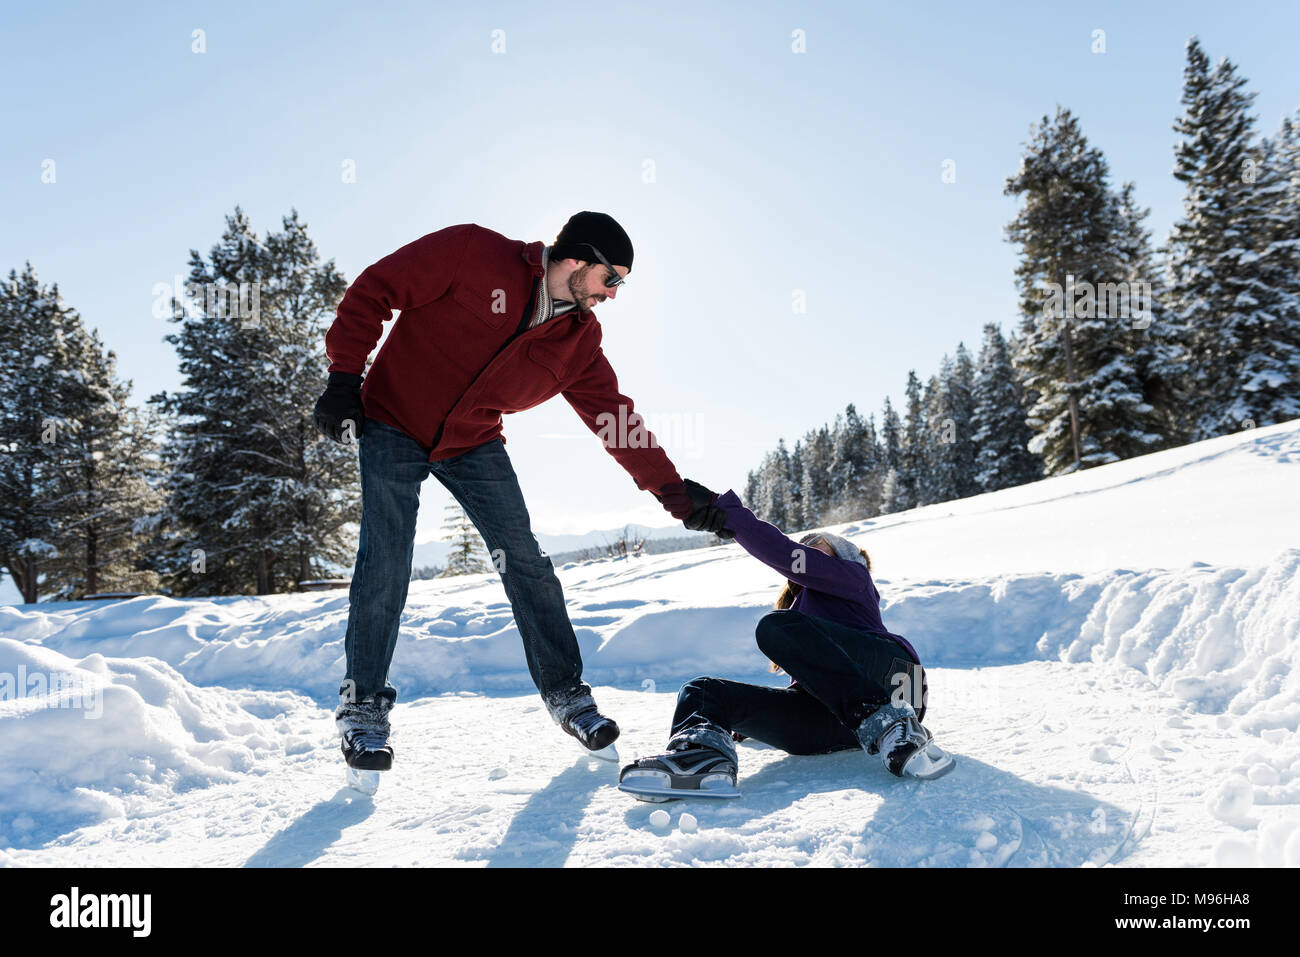 Man helping woman to rise up while skating in snowy landscape Stock Photo